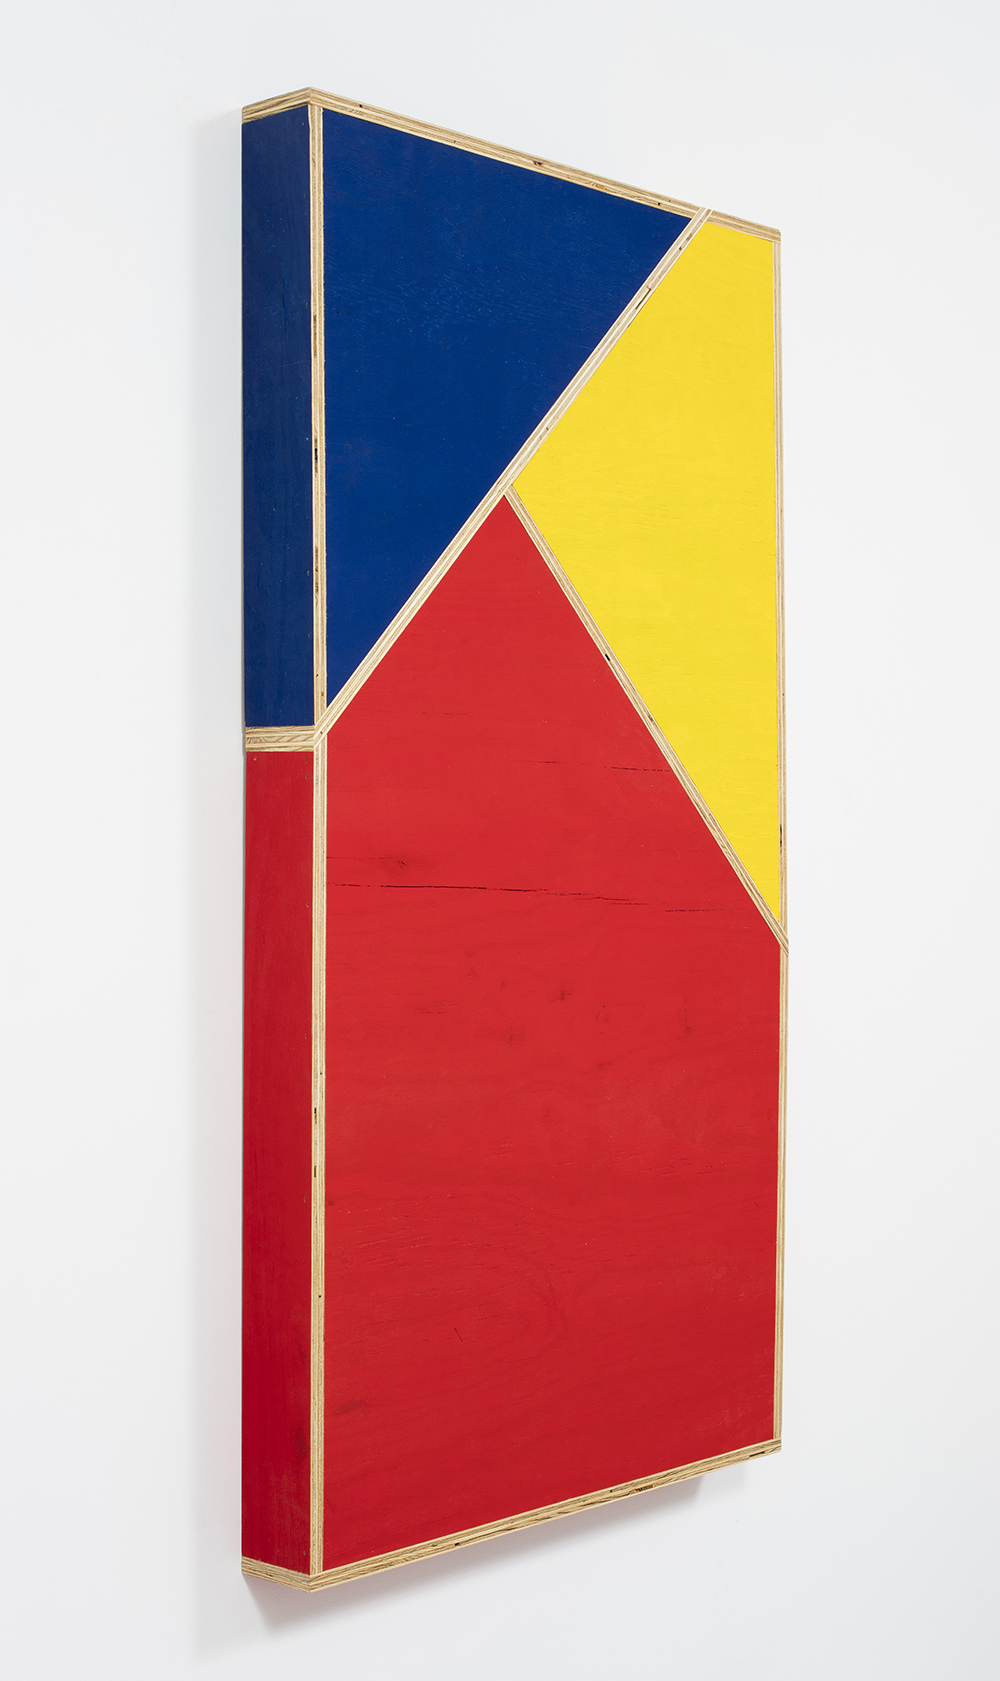 G.T. Pellizzi. <em>Transitional Geometry in Red, Yellow and Blue (Figure 34)</em>, 2016. Eggshell acrylic on plywood, 60 x 32 x 4 inches